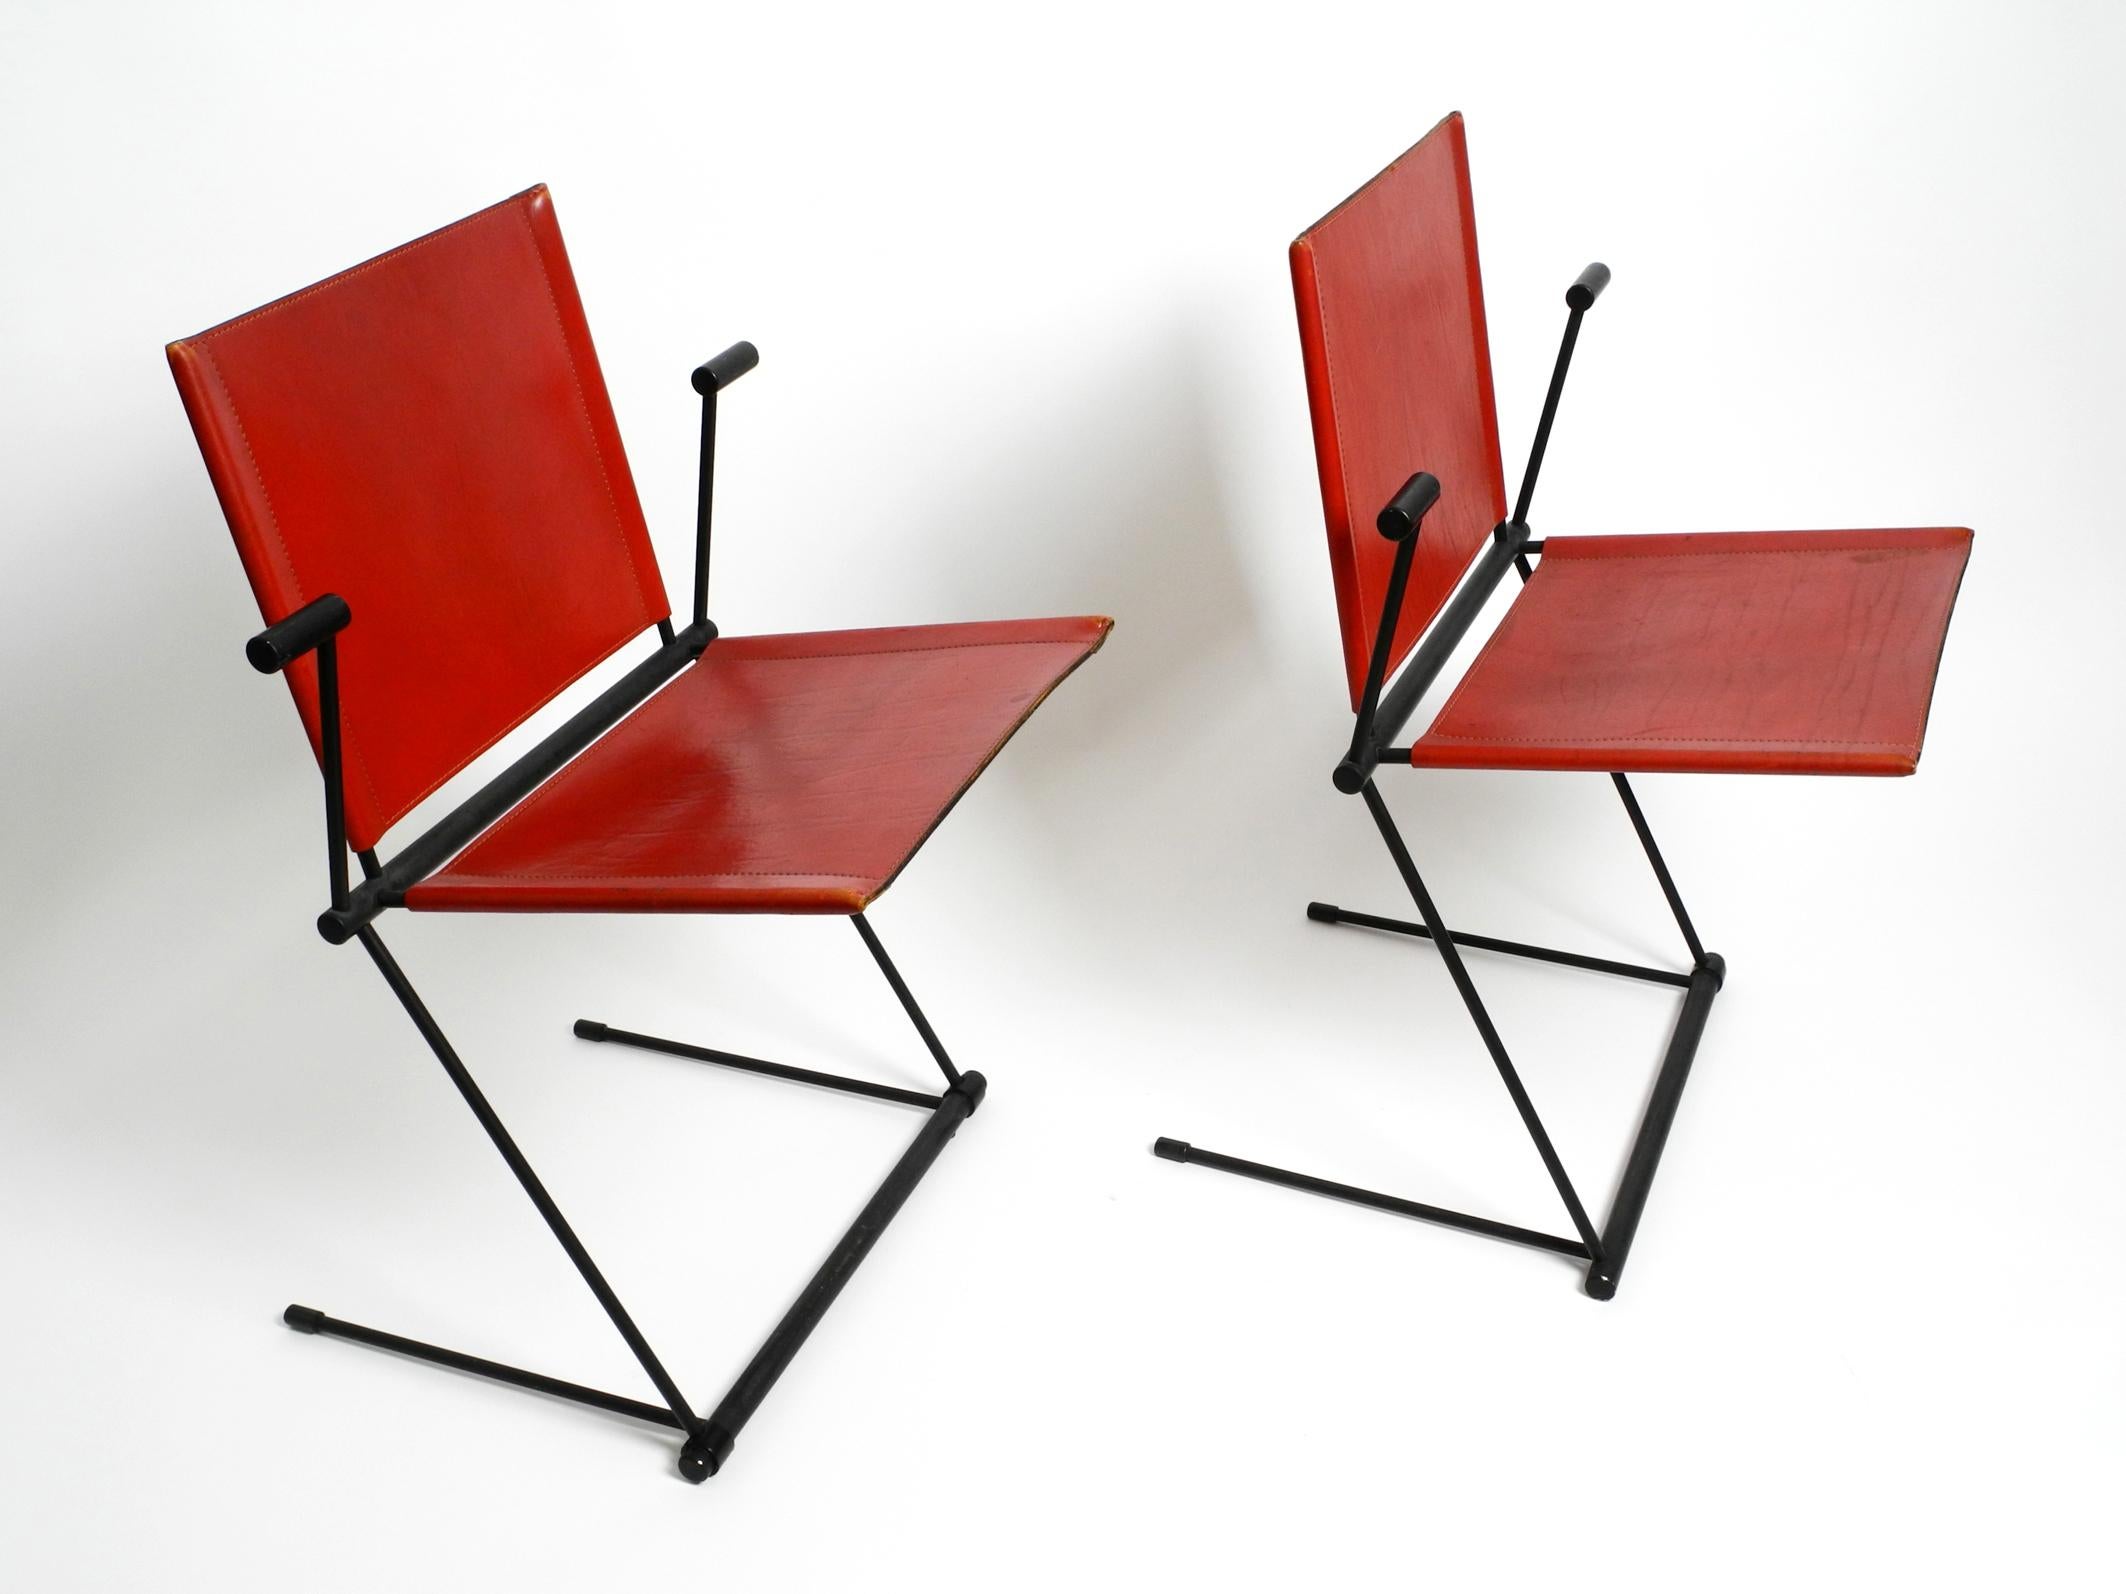 Pair of very rare cantilever leather chairs by Herbert Ohl model Ballerina.
Manufactured by Matteo Grassi. Made in Italy.
The cantilever chairs are made of black lacquered spring steel.
The seat and backrest are made of solid dark red core